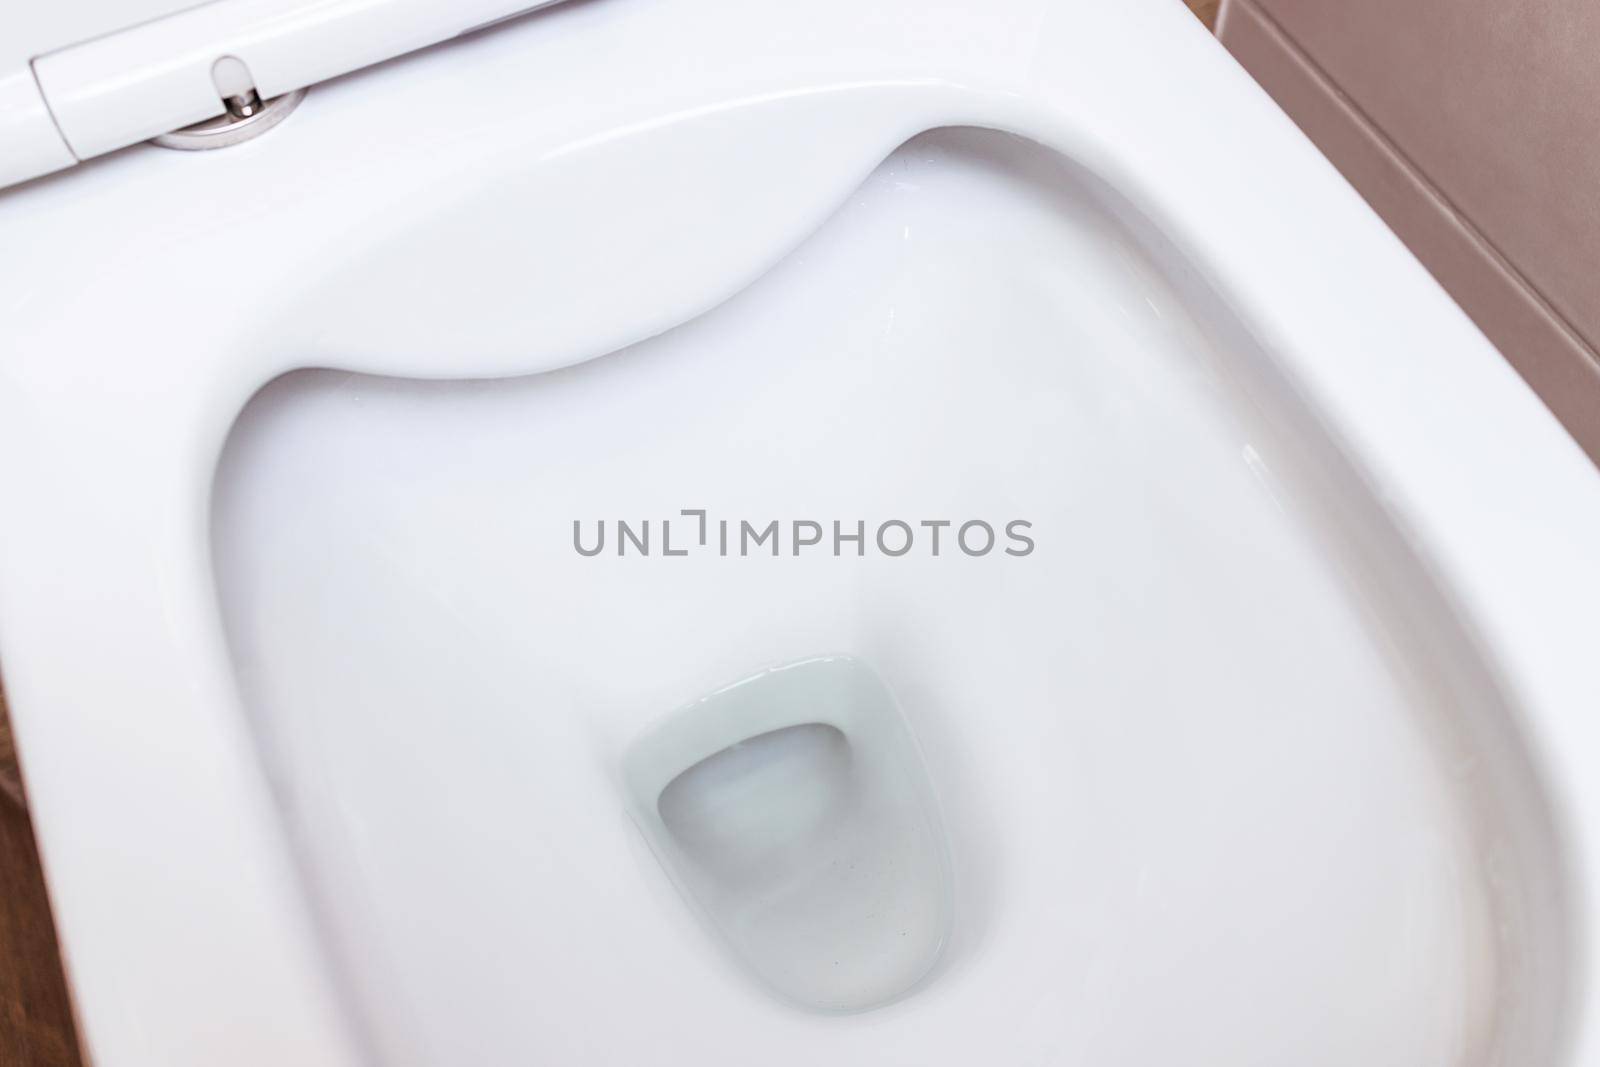 Clean white ceramic toilet bowl in the bathroom toilet room. Open toilet with lid. Plumbing, mockup, design template for interior, cleaning, hygiene concept. View from above, flat lay. Bathroom interior